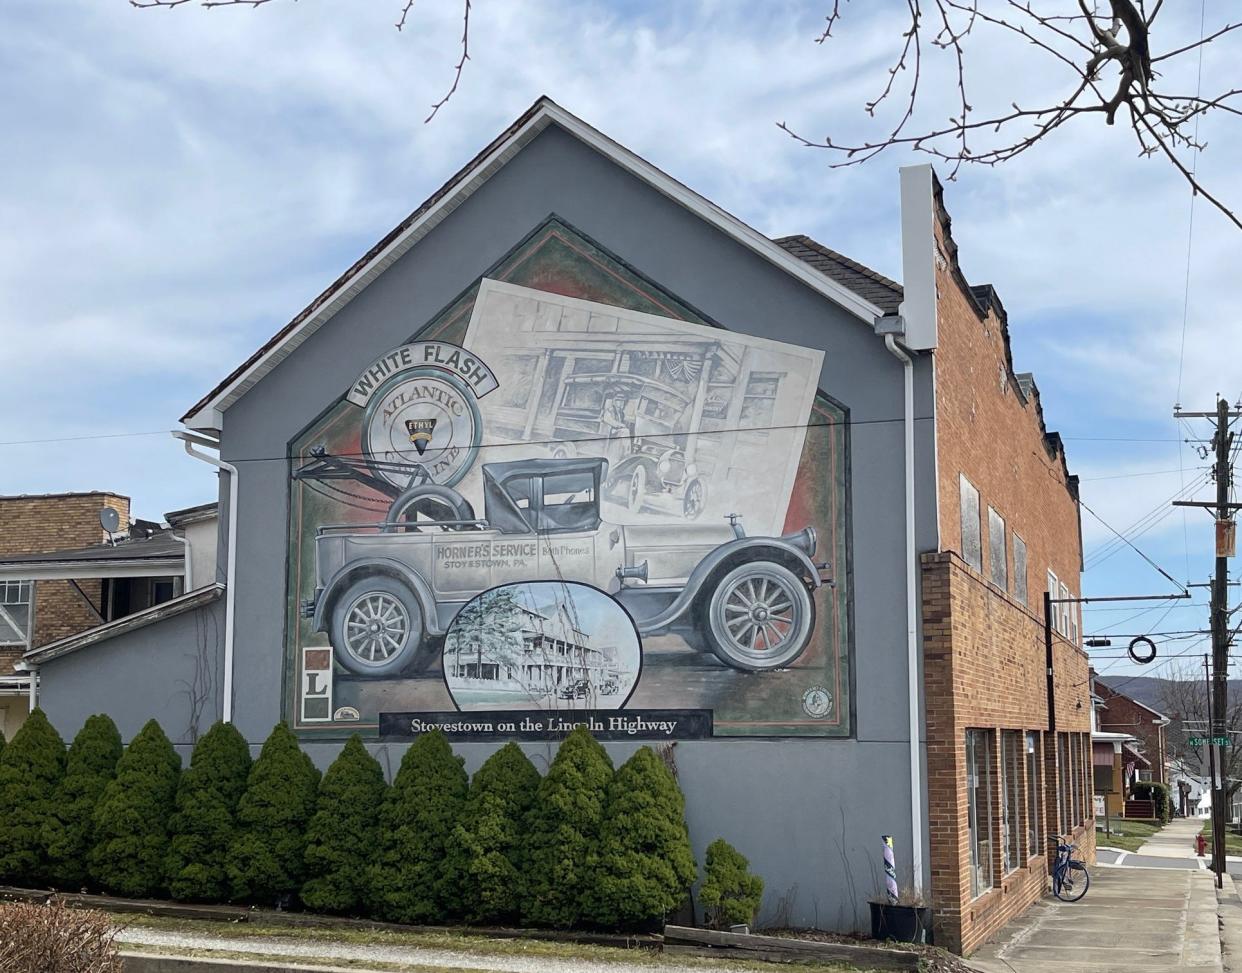 This mural commissioned by the Lincoln Highway Experience honors Stoyestown's history as a stop along the Lincoln Highway, the nation's first coast-to-coast highway. The mural is painted on the side of the Mayapple Marketplace, a locally-owned general store at 101 W. Main St.